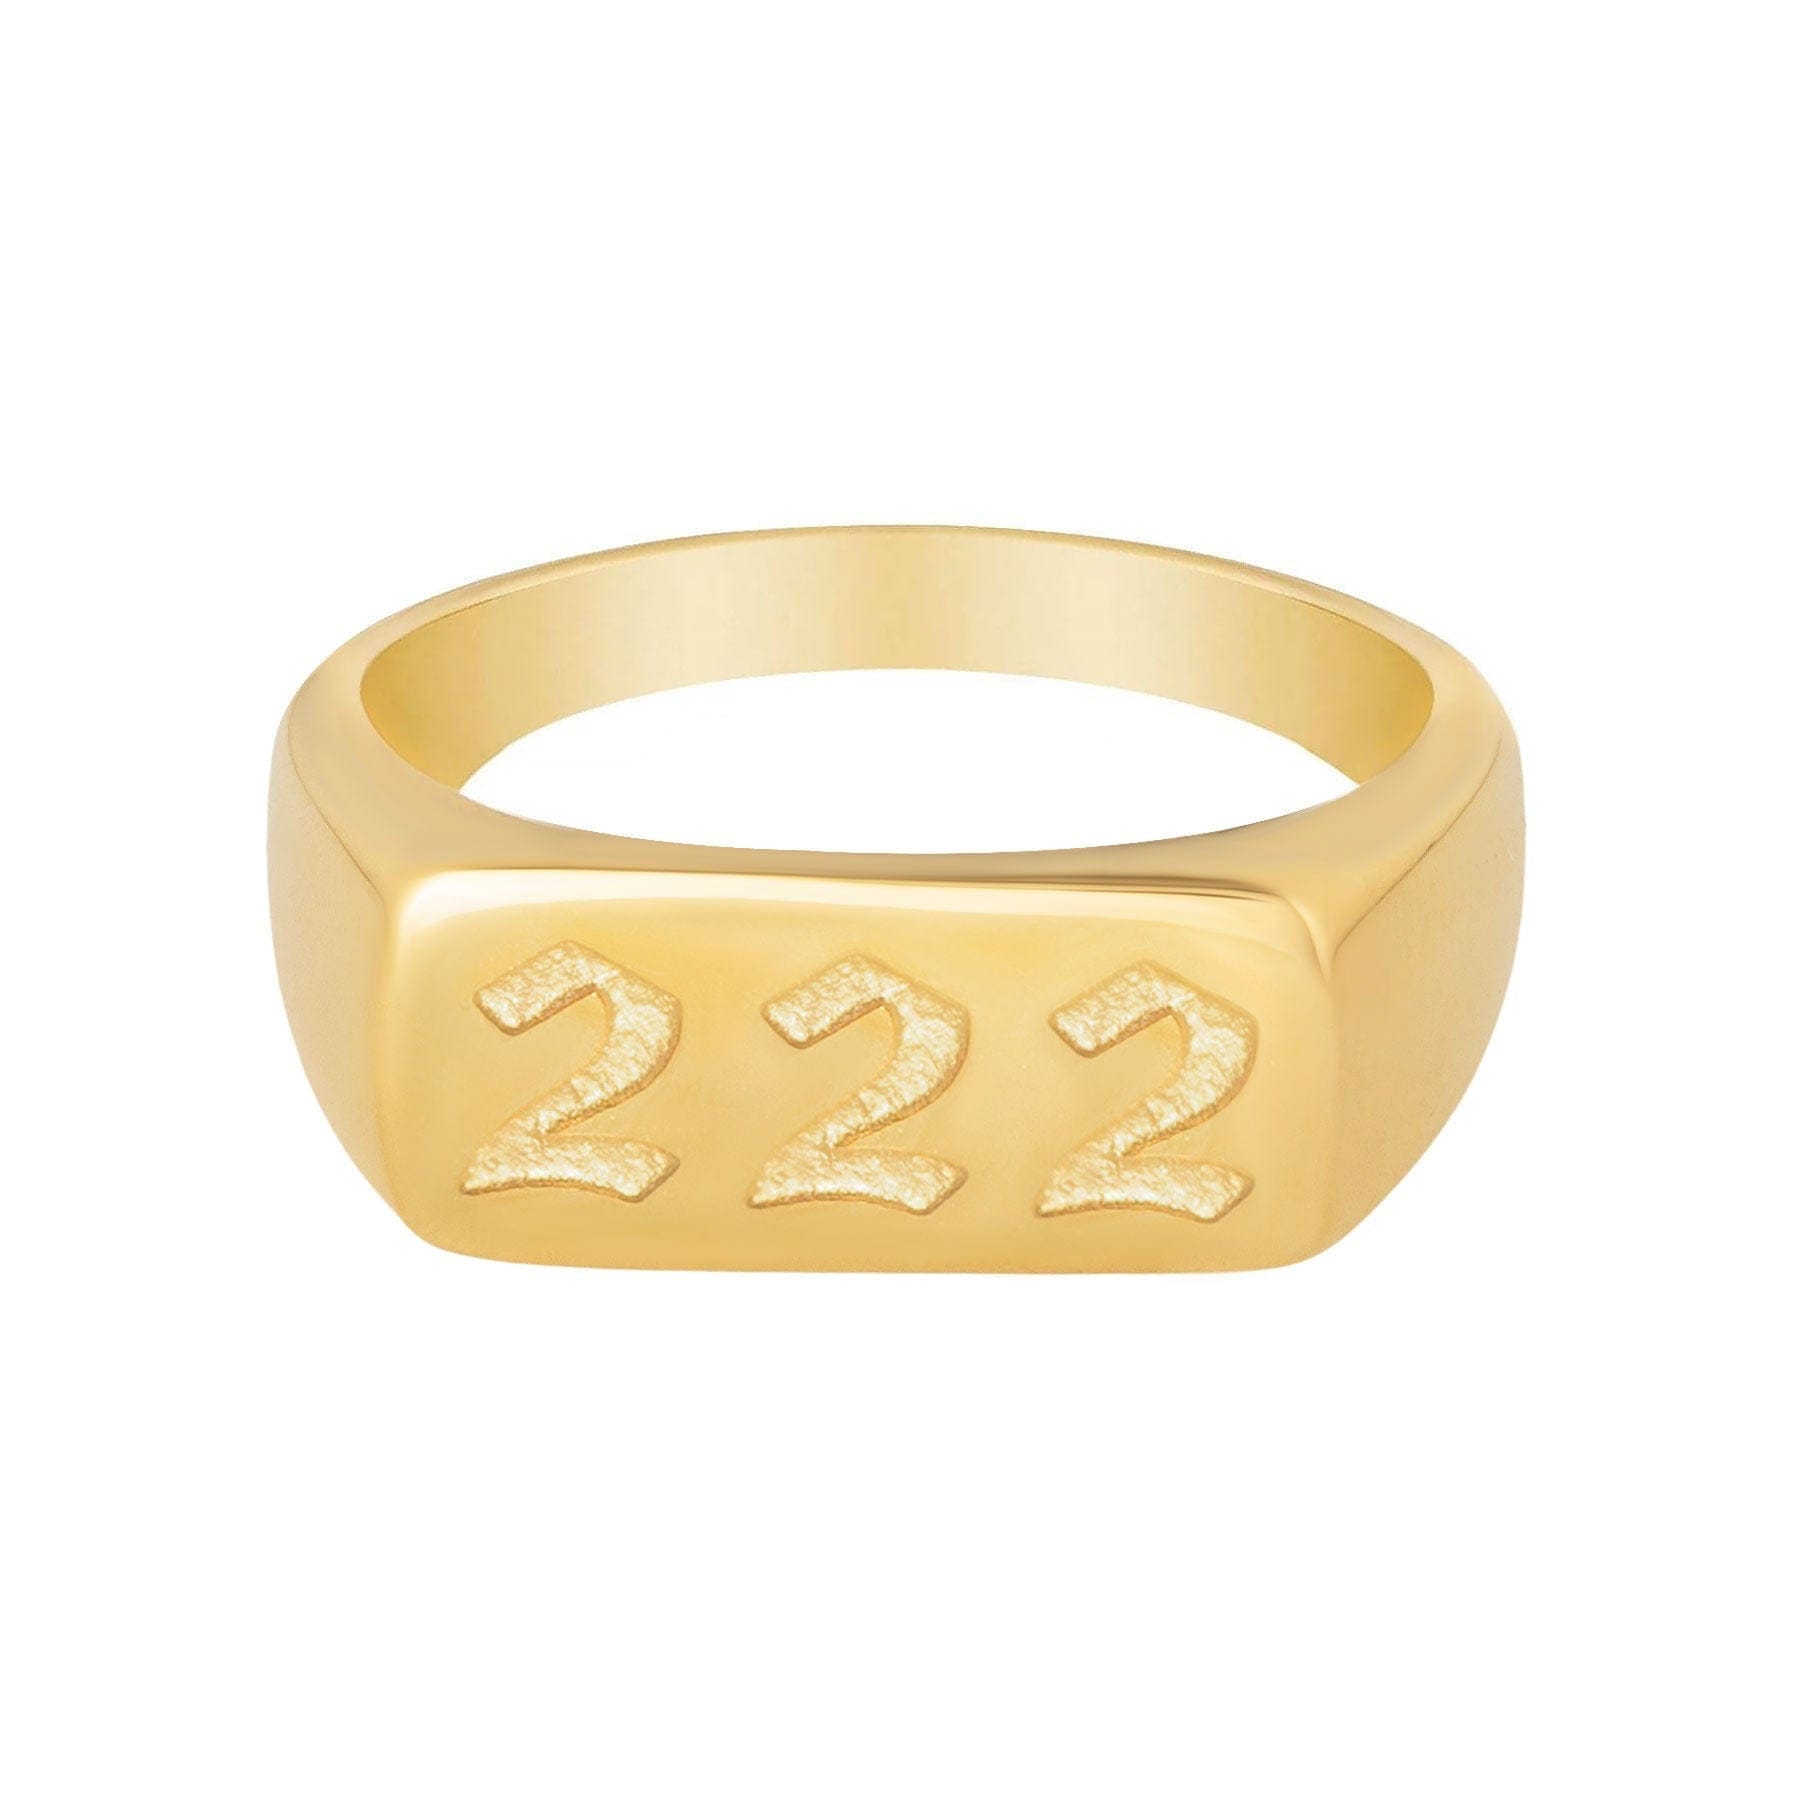 BohoMoon Stainless Steel Angel Numbers Ring Gold / 222 / US 6 / UK L / EUR 51 (small)